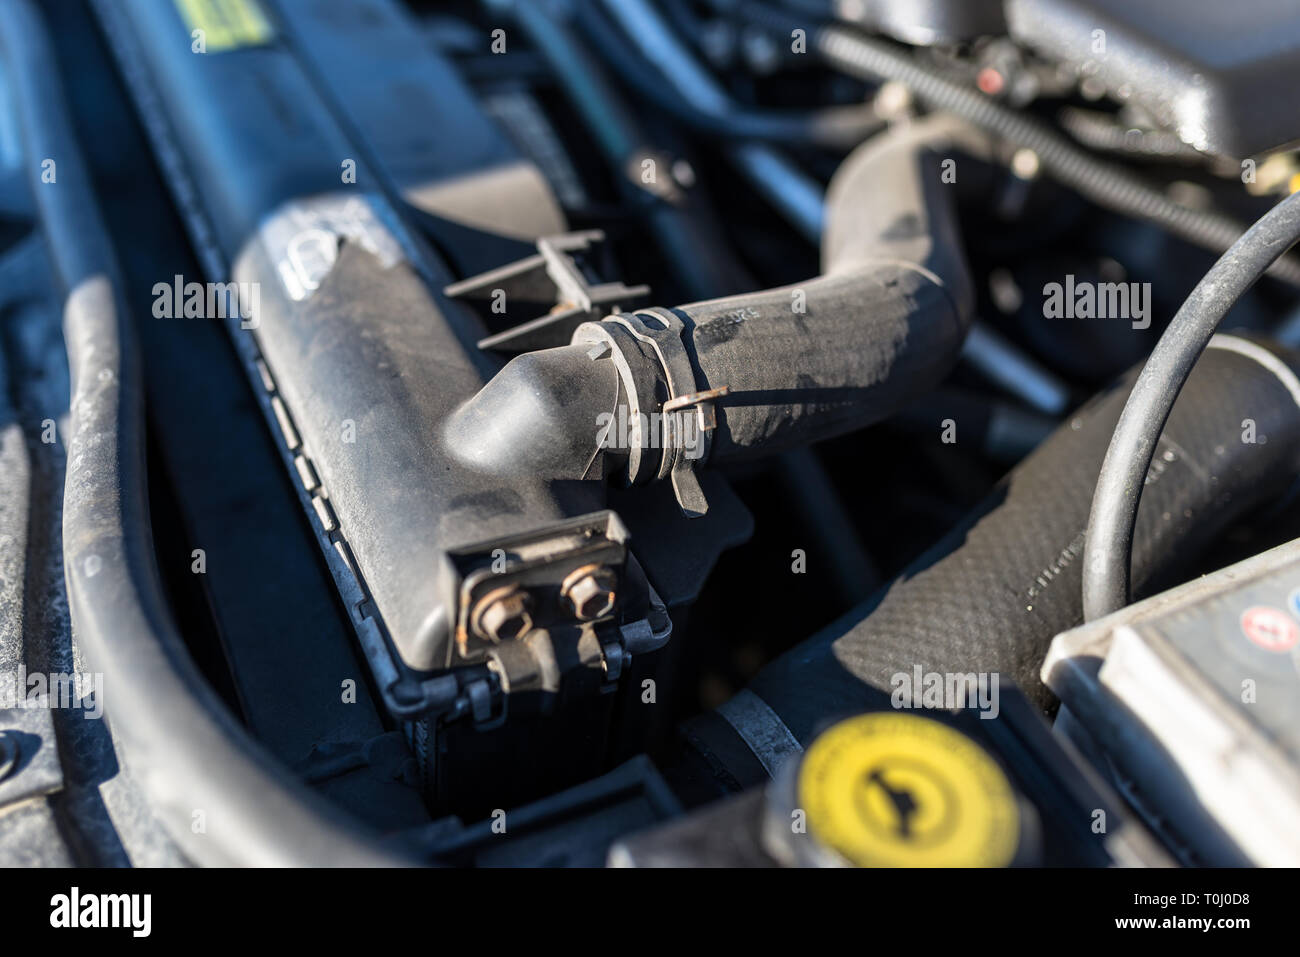 Car Radiator Fan High Resolution Stock Photography and Images - Alamy